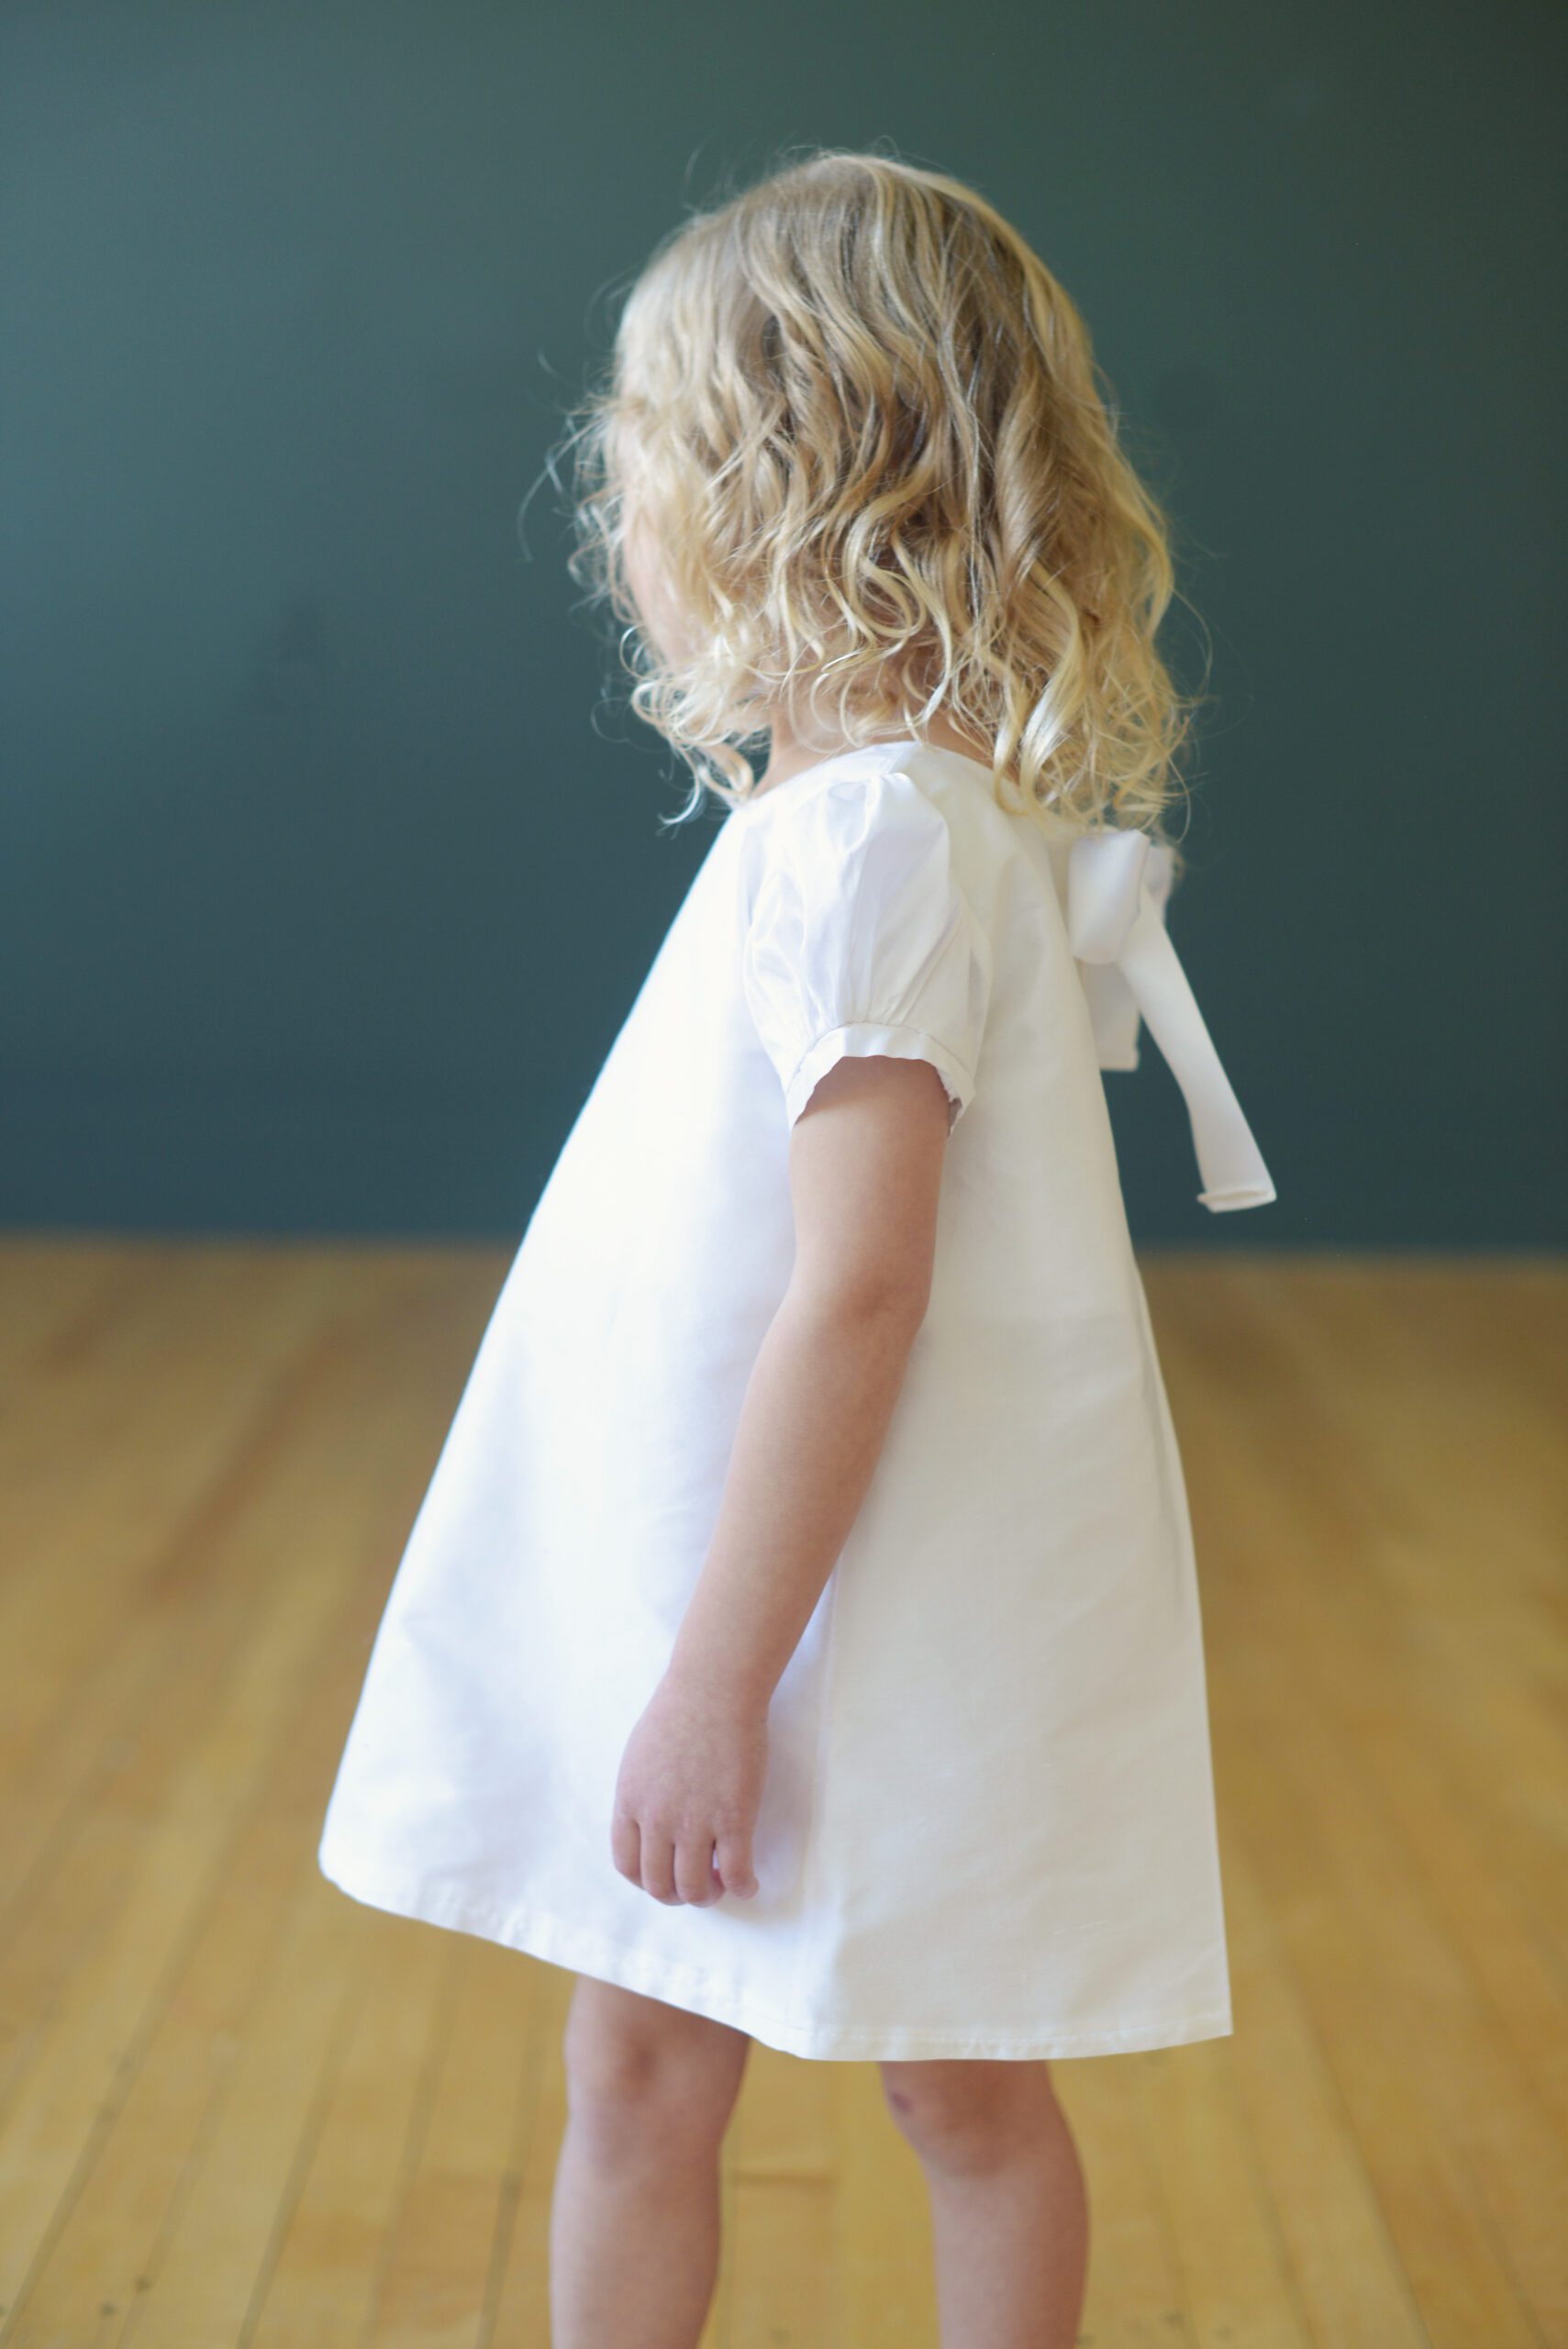 A photo of a 3 year old flower girl wearing a white silk knee length dress